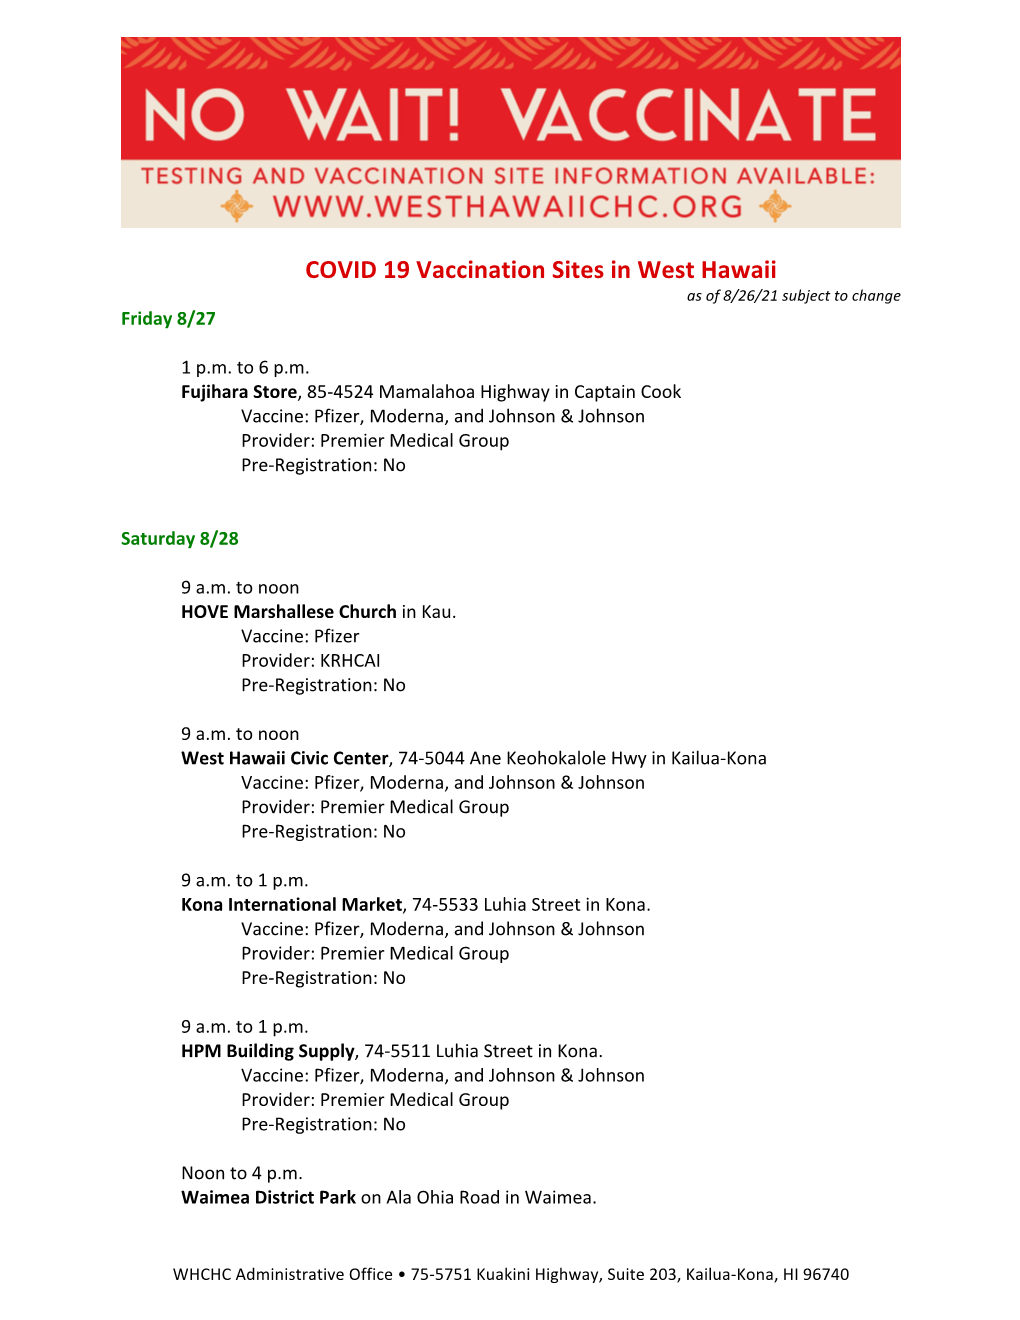 COVID 19 Vaccination Sites in West Hawaii As of 8/26/21 Subject to Change Friday 8/27